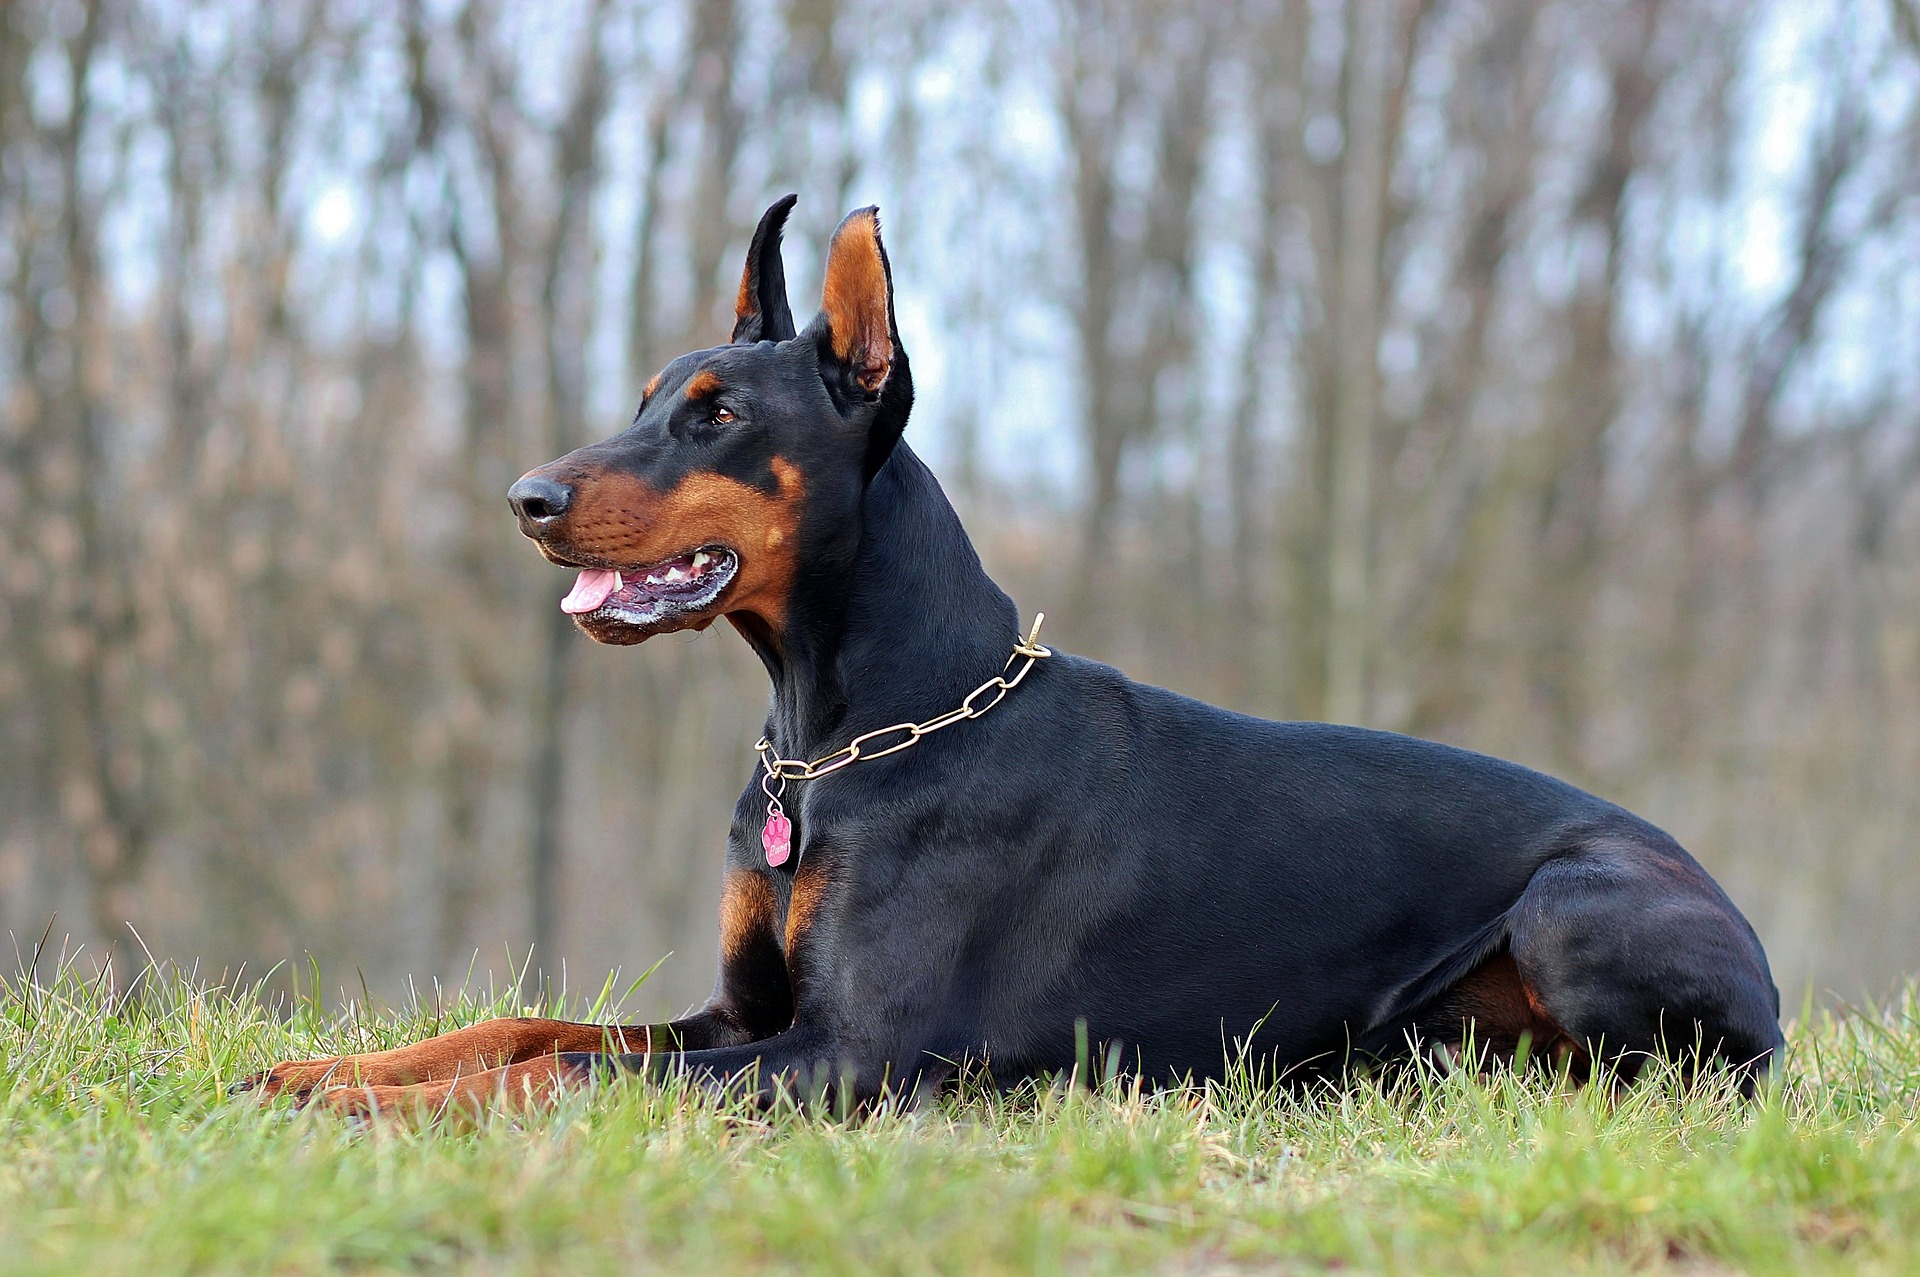 Doberman shedding and lying in the field